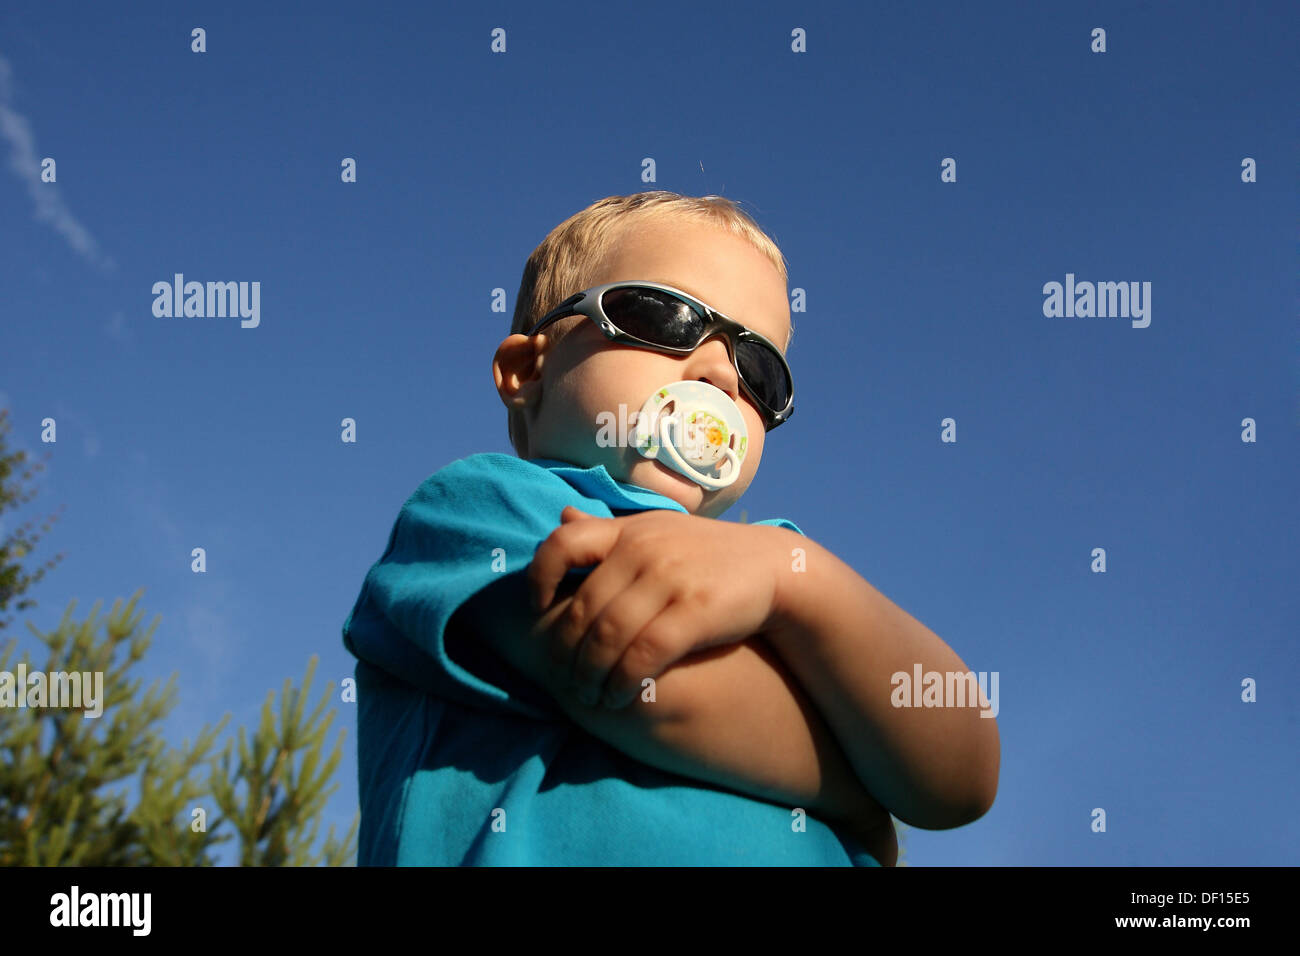 Birkach, Germany, posiet toddler with pacifier and sunglasses Stock Photo